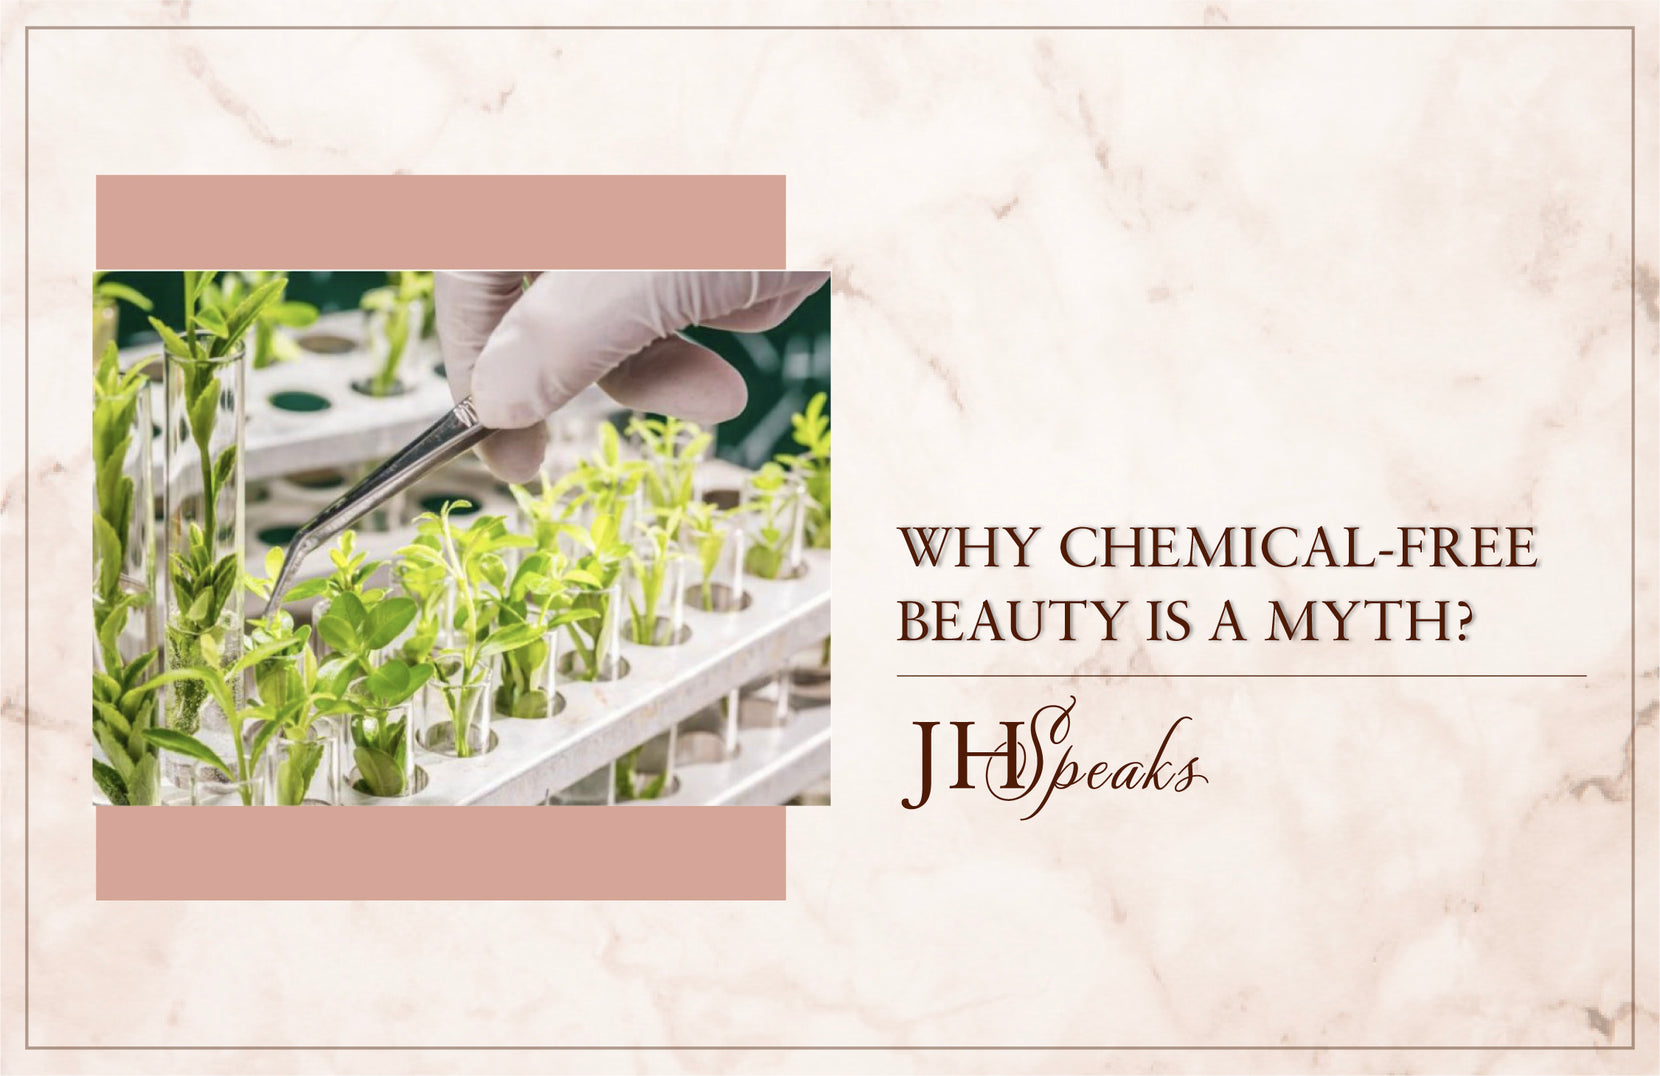 Why Chemical-Free Beauty Is A Myth?